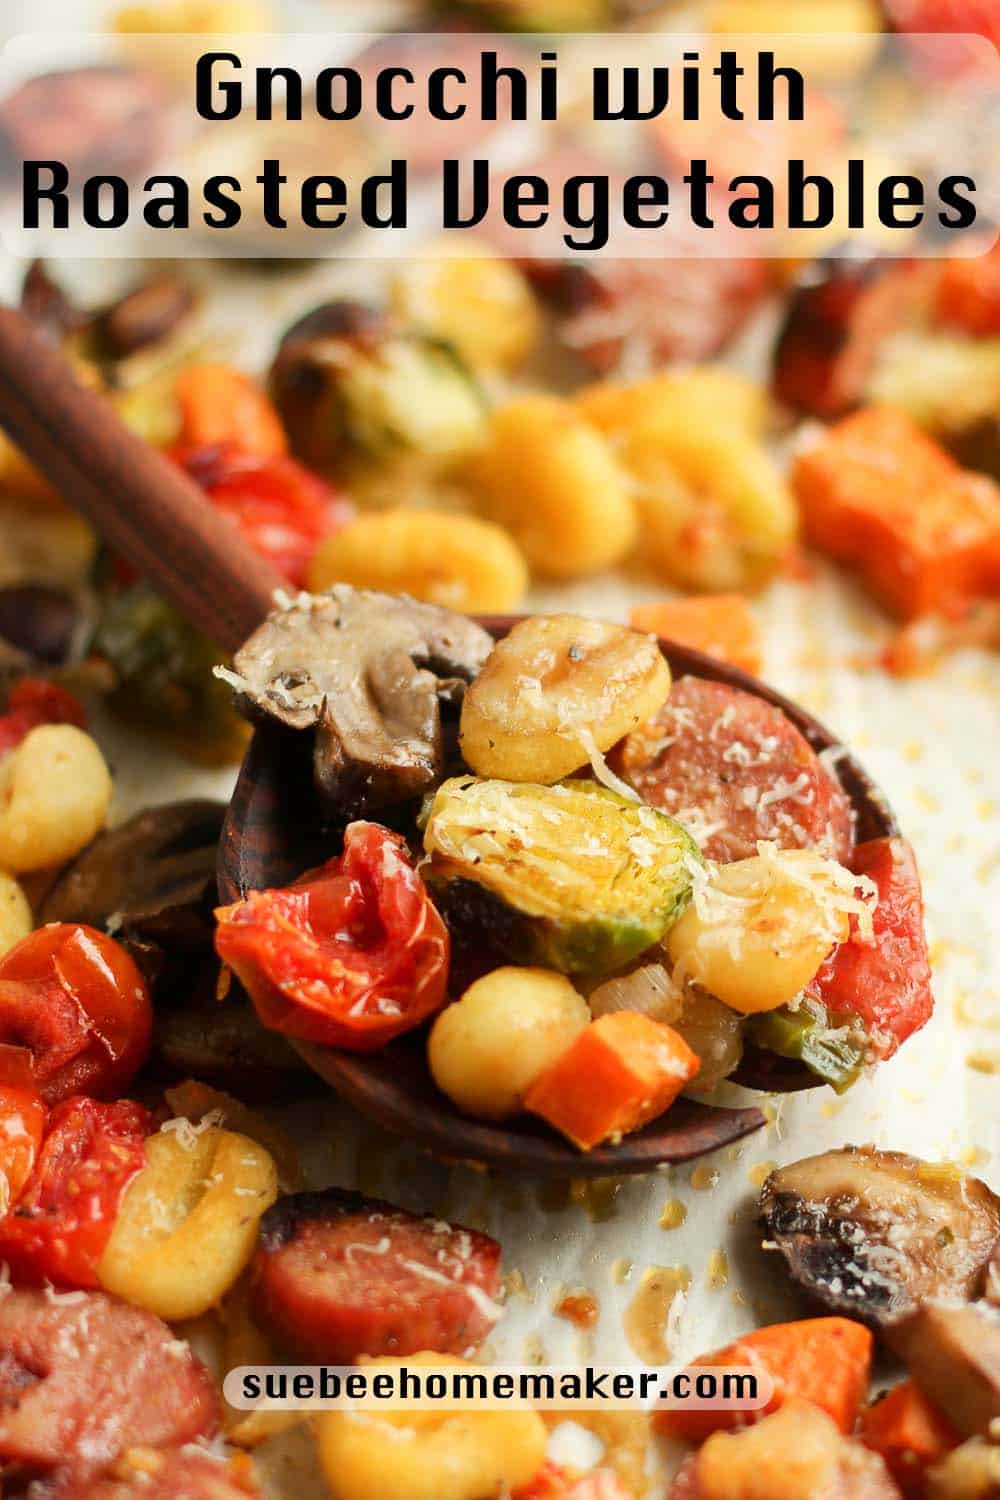 A sheet pan of gnocchi and roasted veggies and a spoonful of the veggies on top.